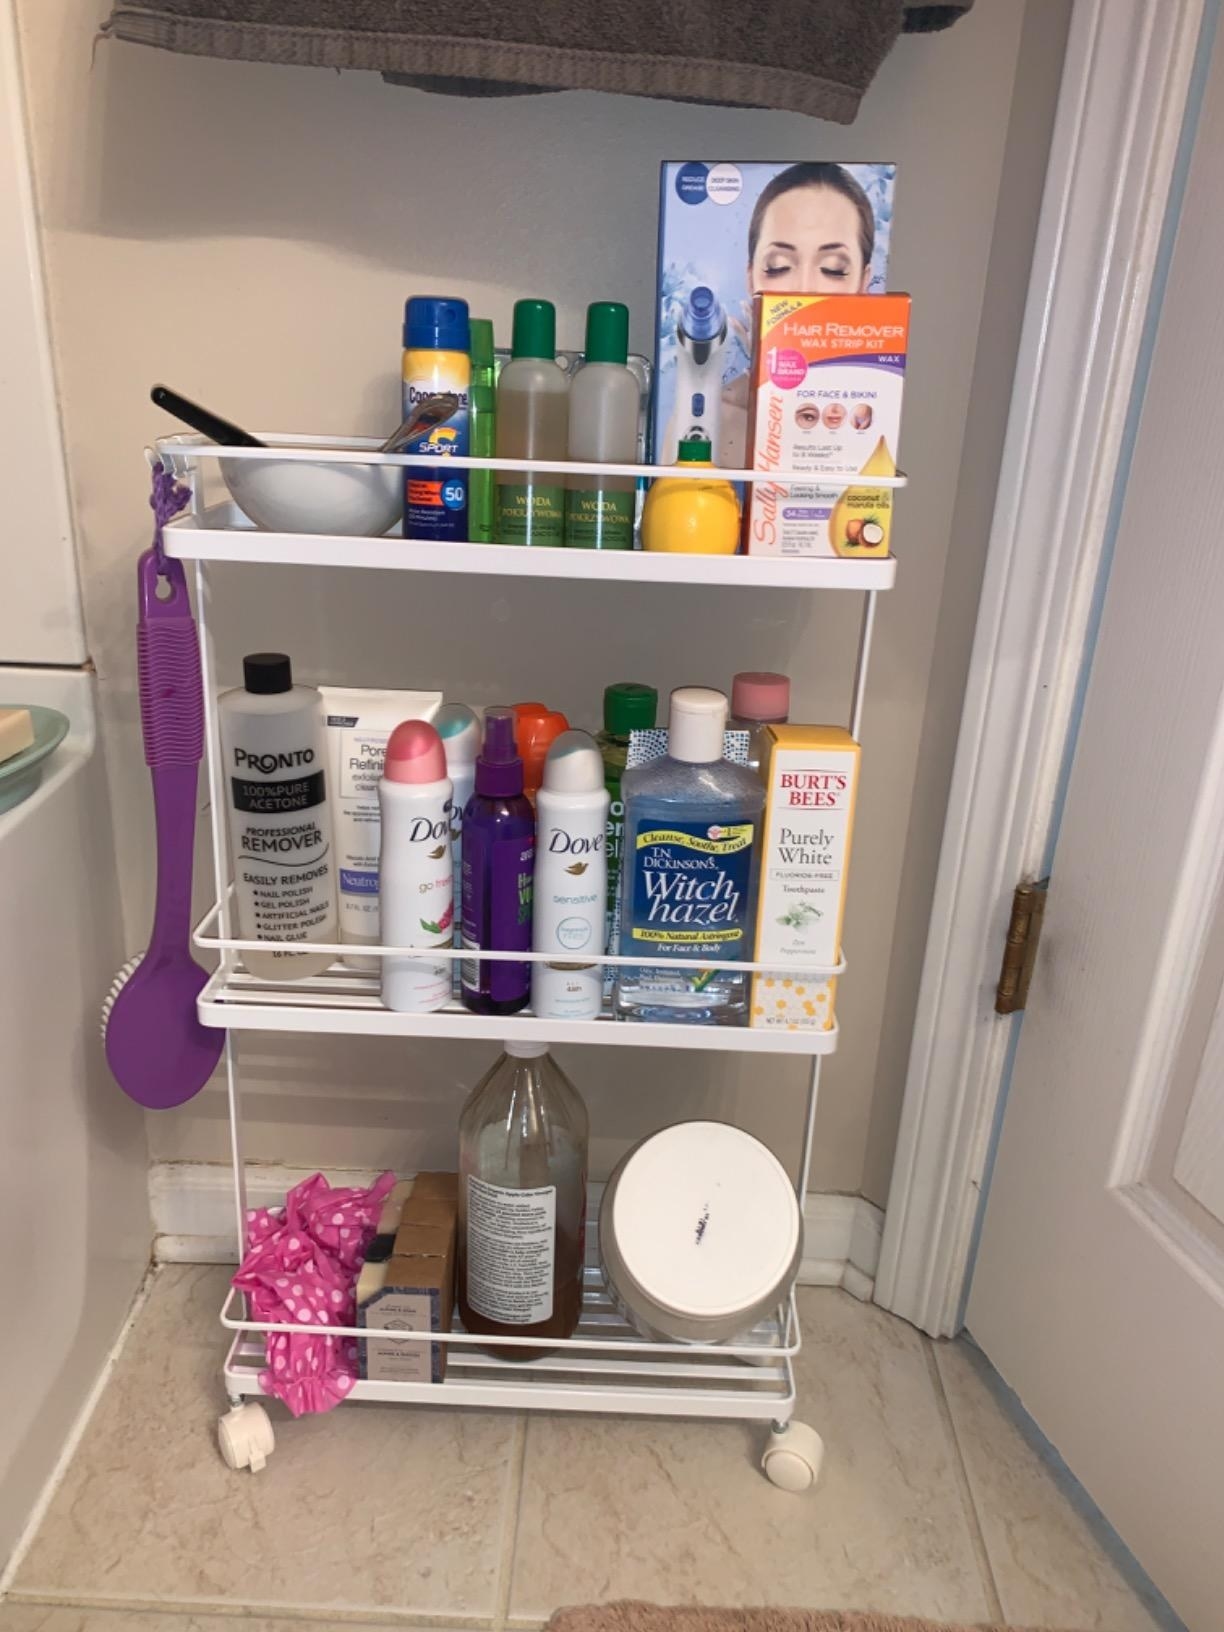 The narrow cart on wheels with three open shelves in a bathroom